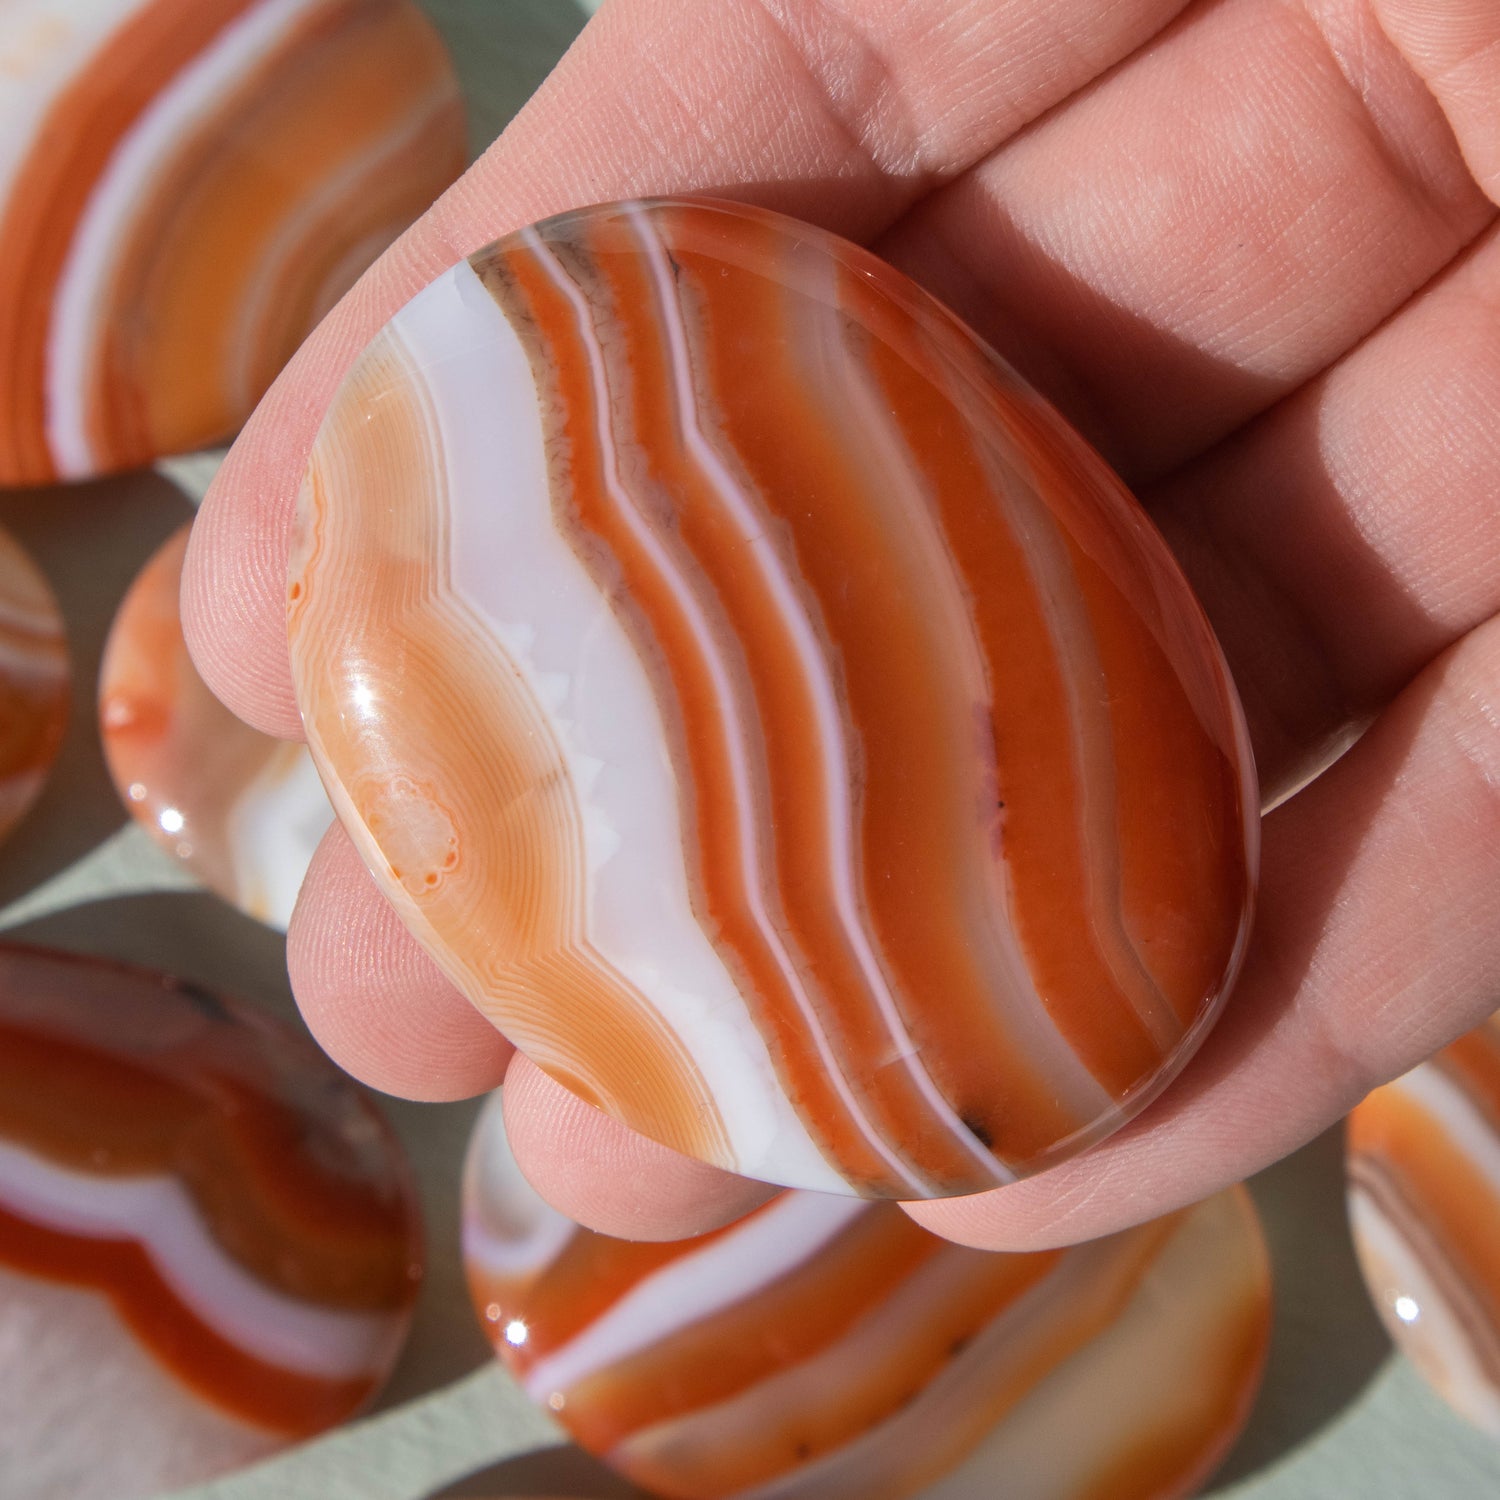 red agate, red agate palm stone, crystal palm stone, gemstone palm stone, red agate crystal, red agate stone, red agate properties, red agate healing properties, red agate metaphysical properties, red agate meaning